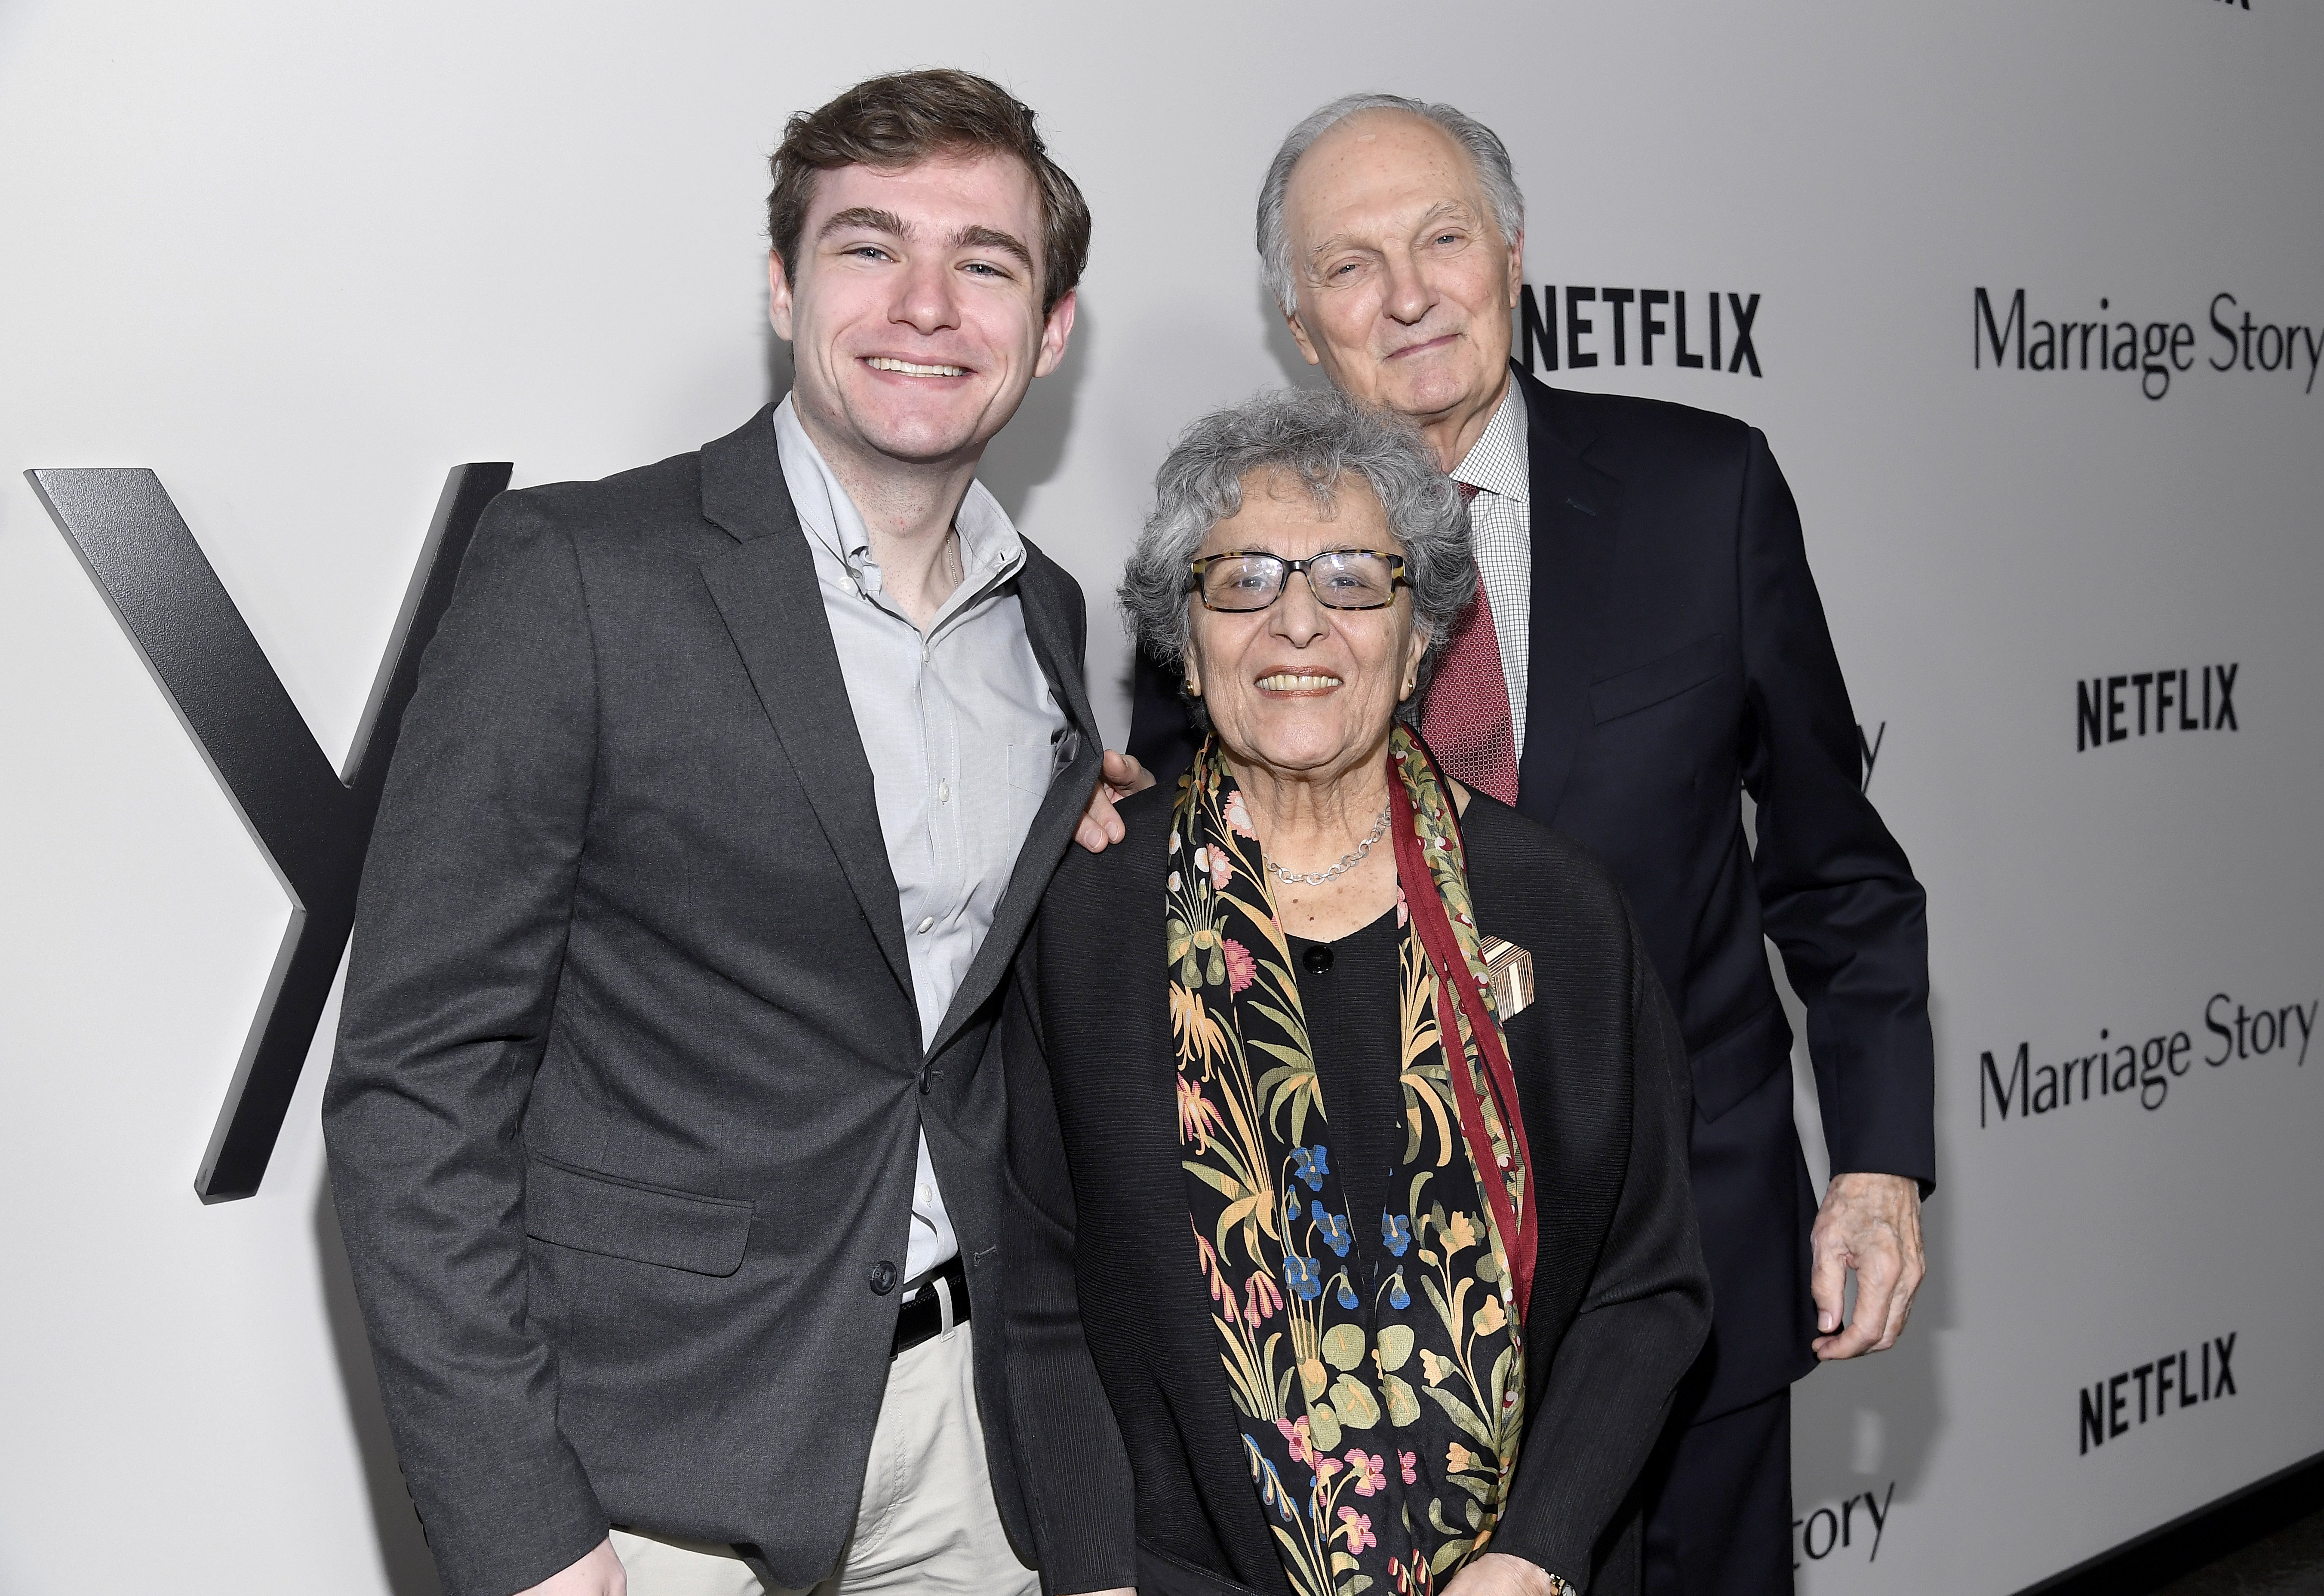 Jake Alda Coffey, Arlene and Alan Alda at the "Marriage Story" premiere on November 5, 2019, in Los Angeles, California | Source: Getty Images